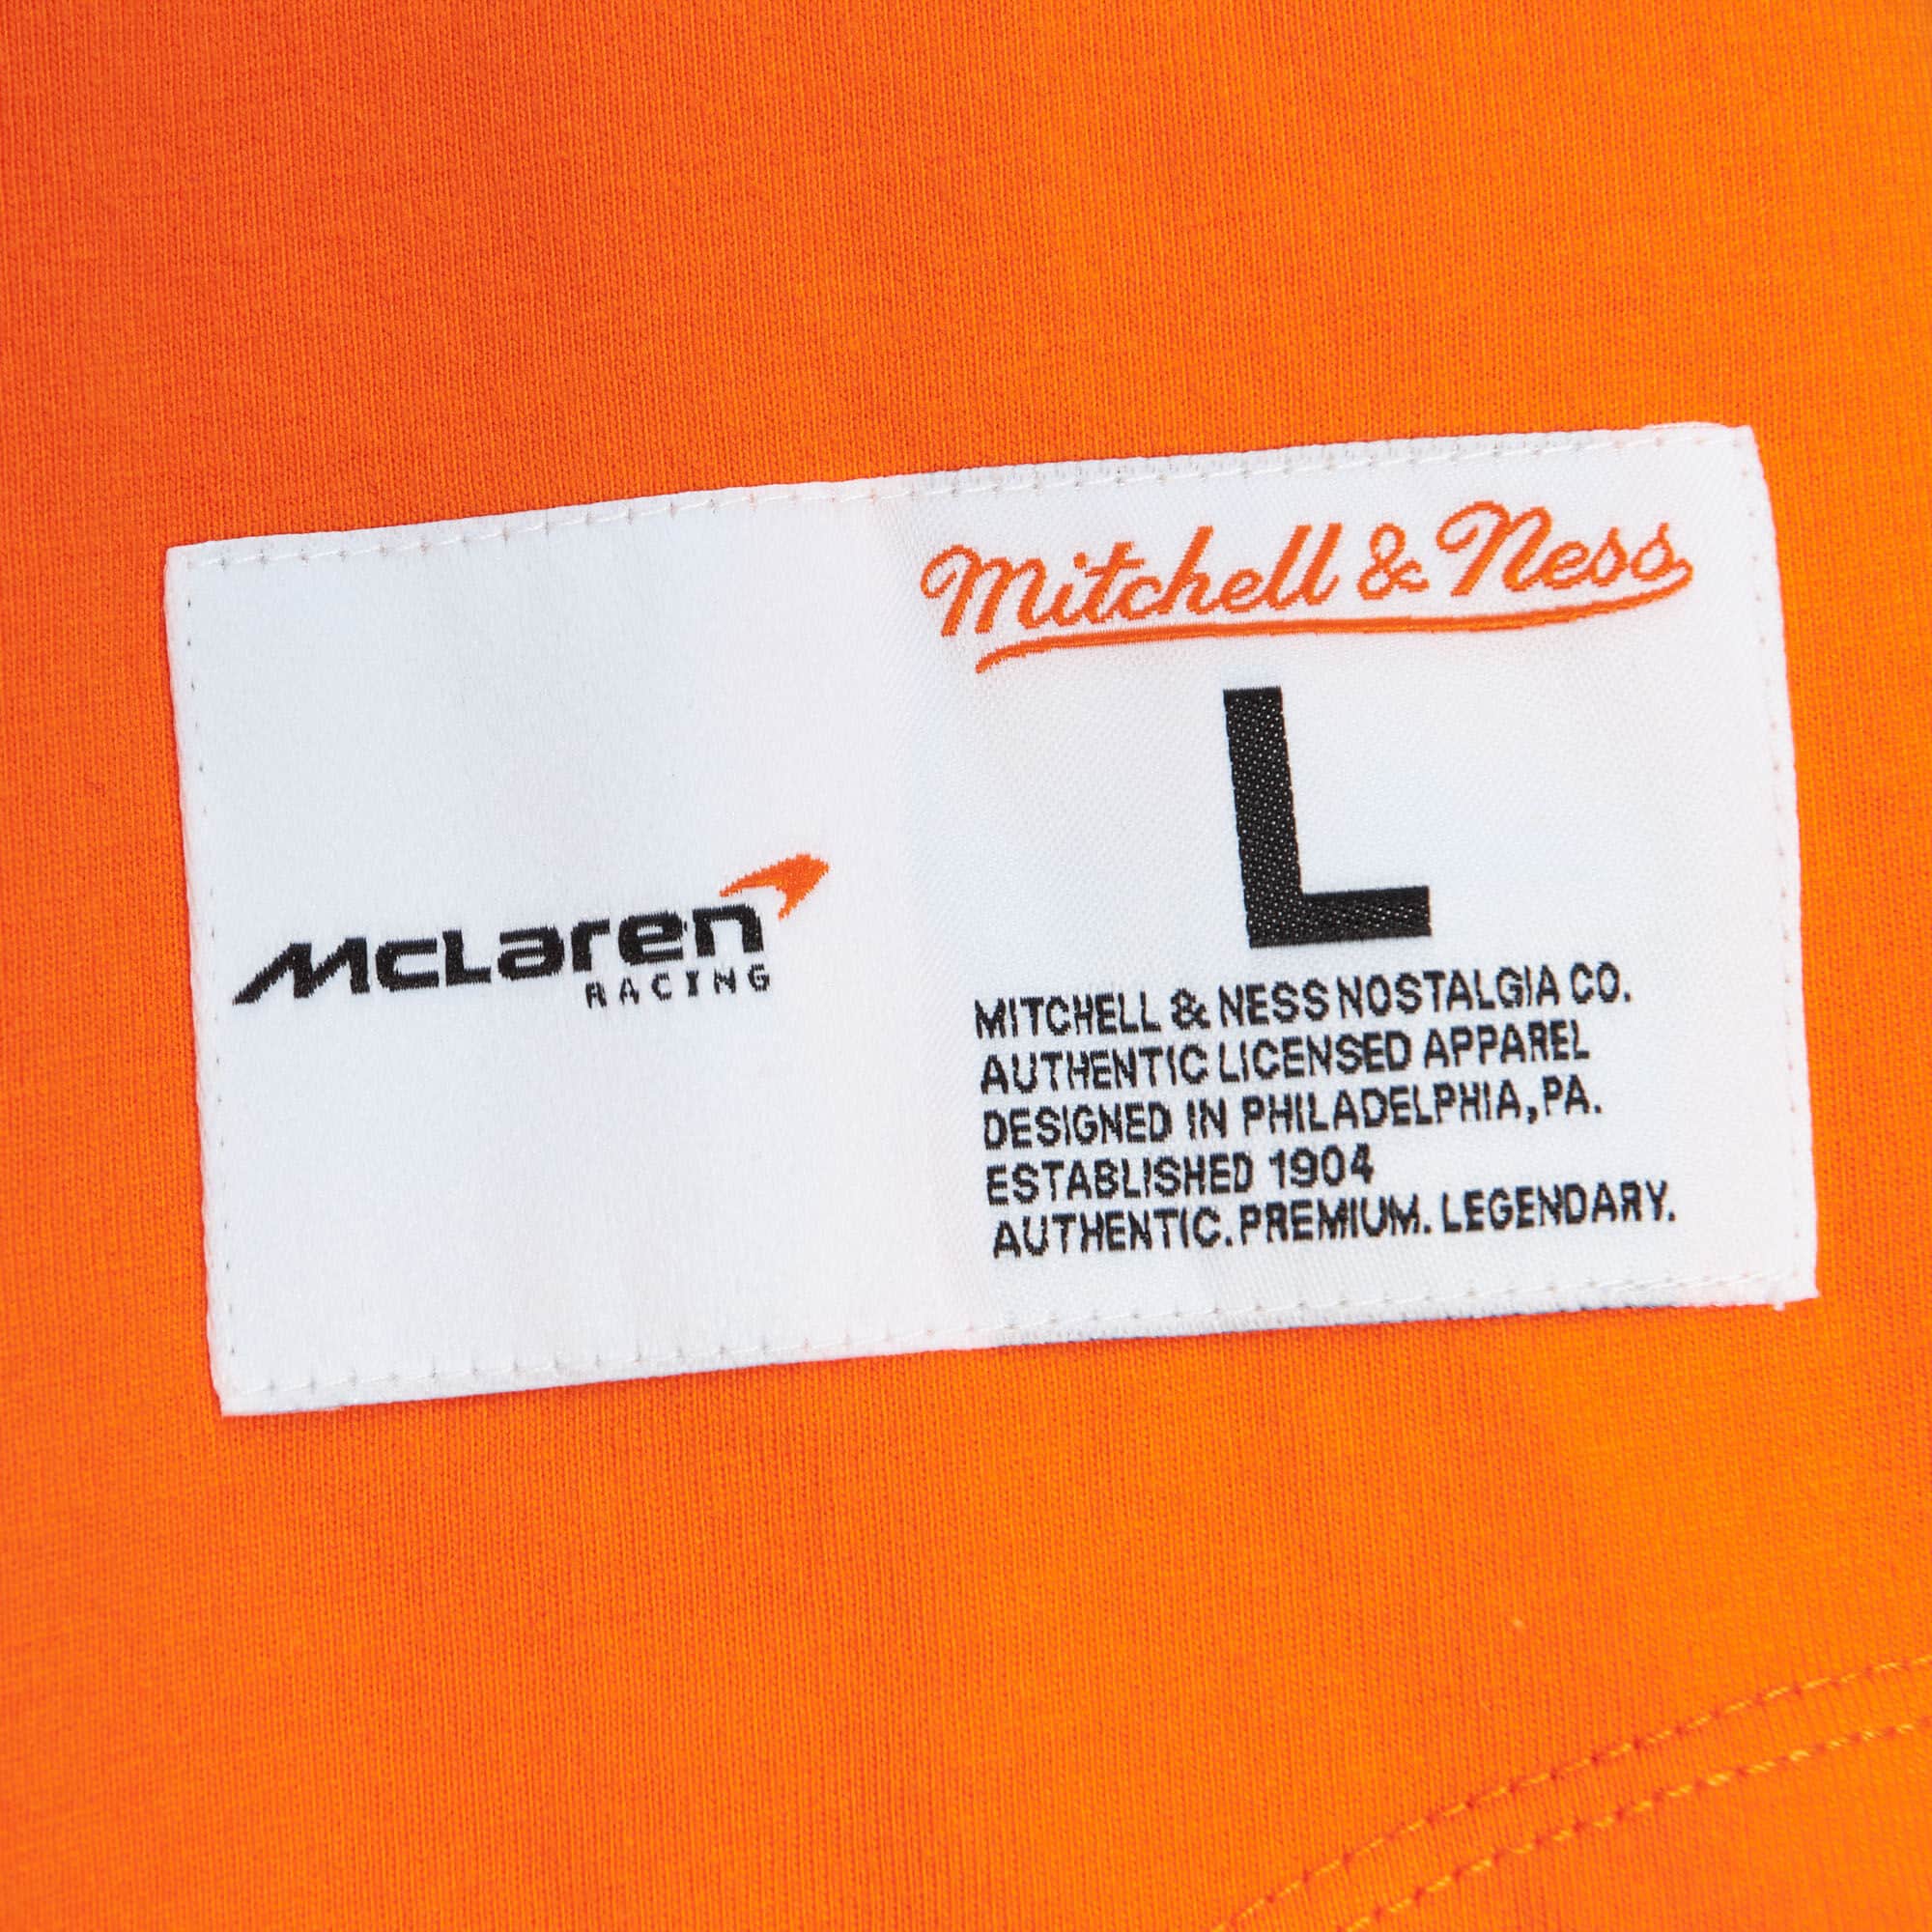 McLaren Racing F1 Special Edition Miami GP Mitchell & Ness Baseball Jersey - Blue/Pink